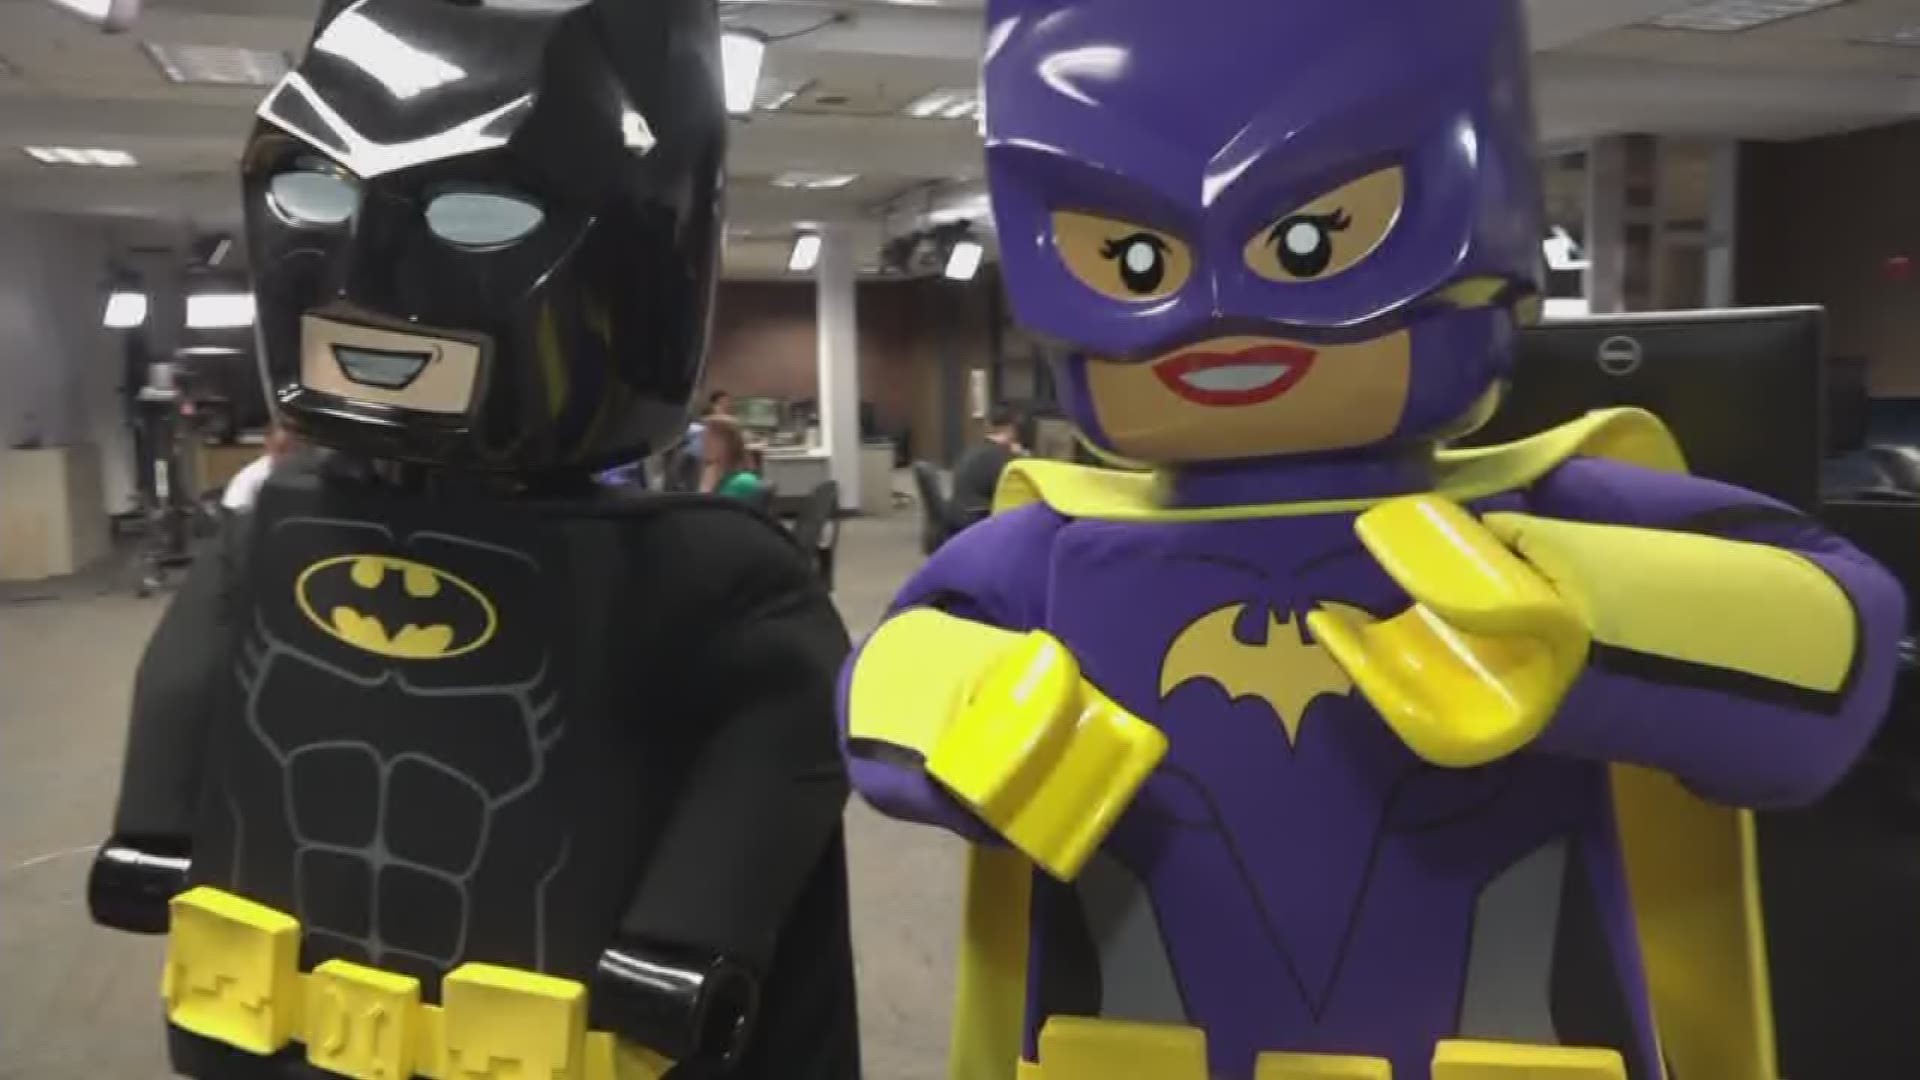 Mark and Megan preview the upcoming Lego Batman movie with a little help from some friends.